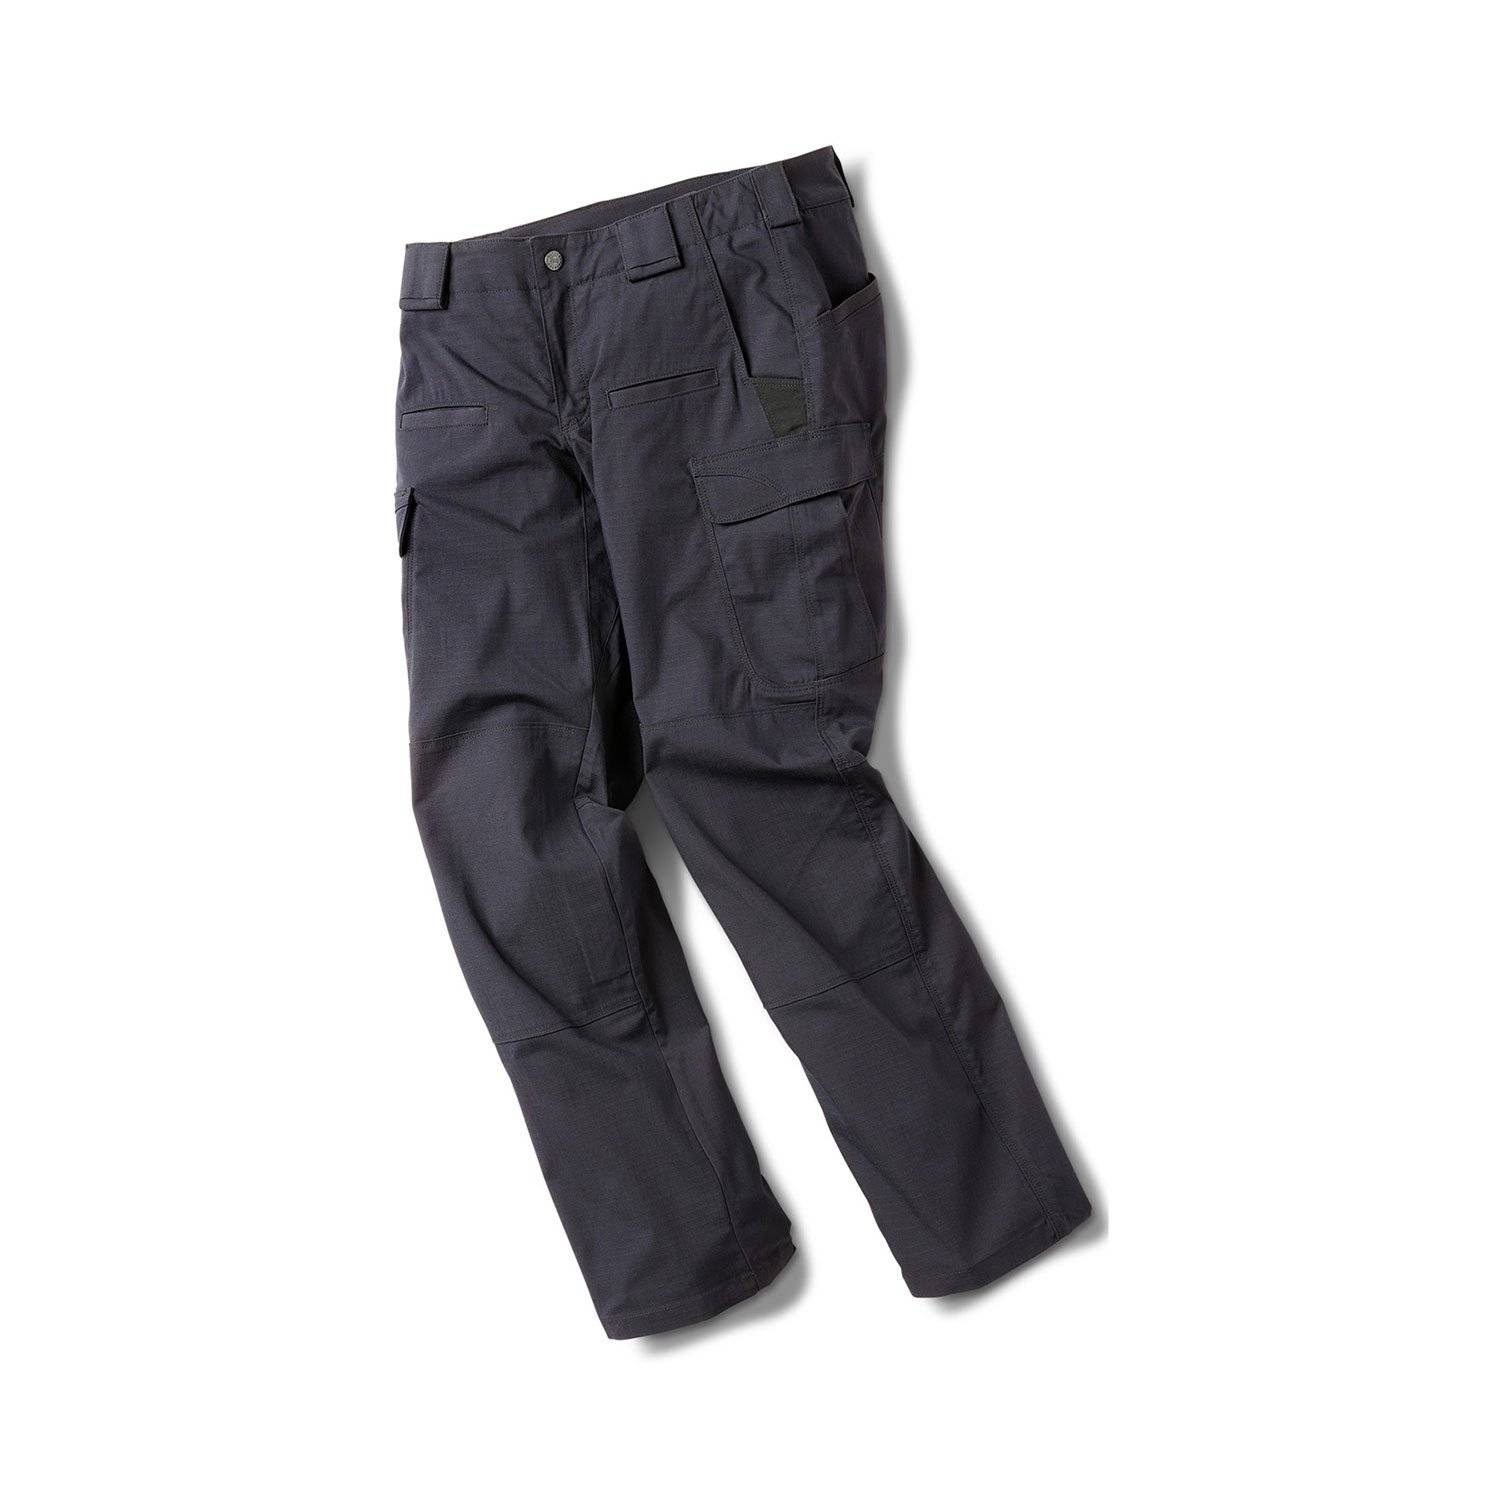 5.11 Tactical Womens NYPD Ripstop Stryke Pant